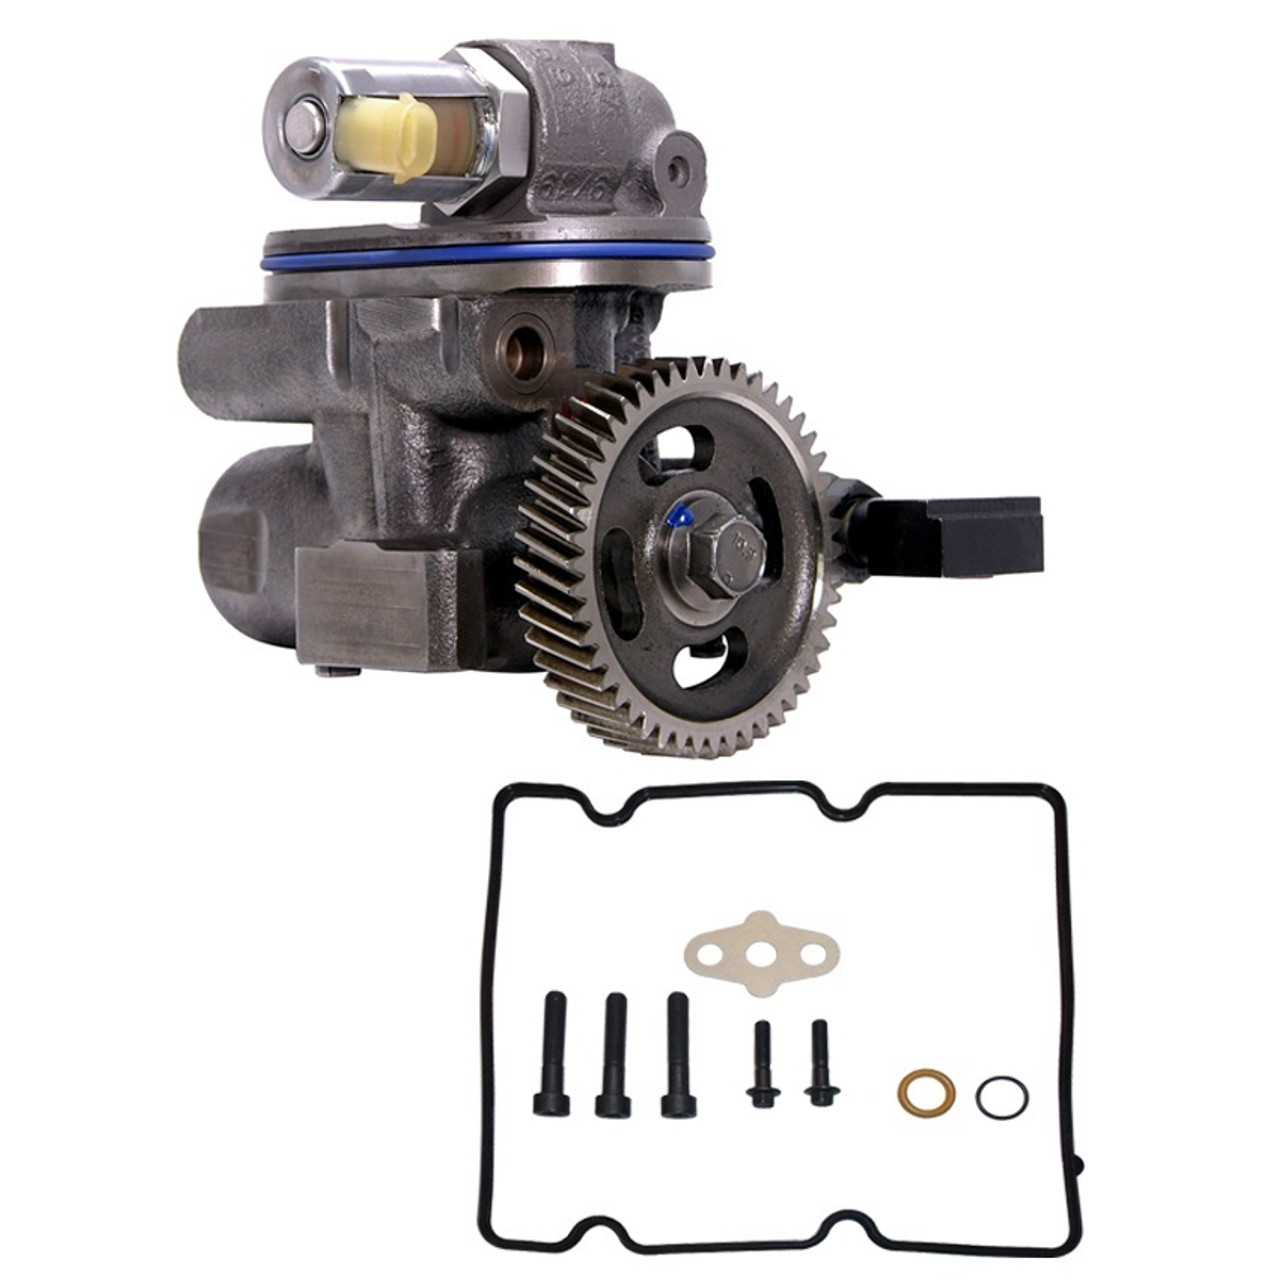 New Water Pump for 2004-2010 Ford 6.0L Power Stroke Diesel Engines